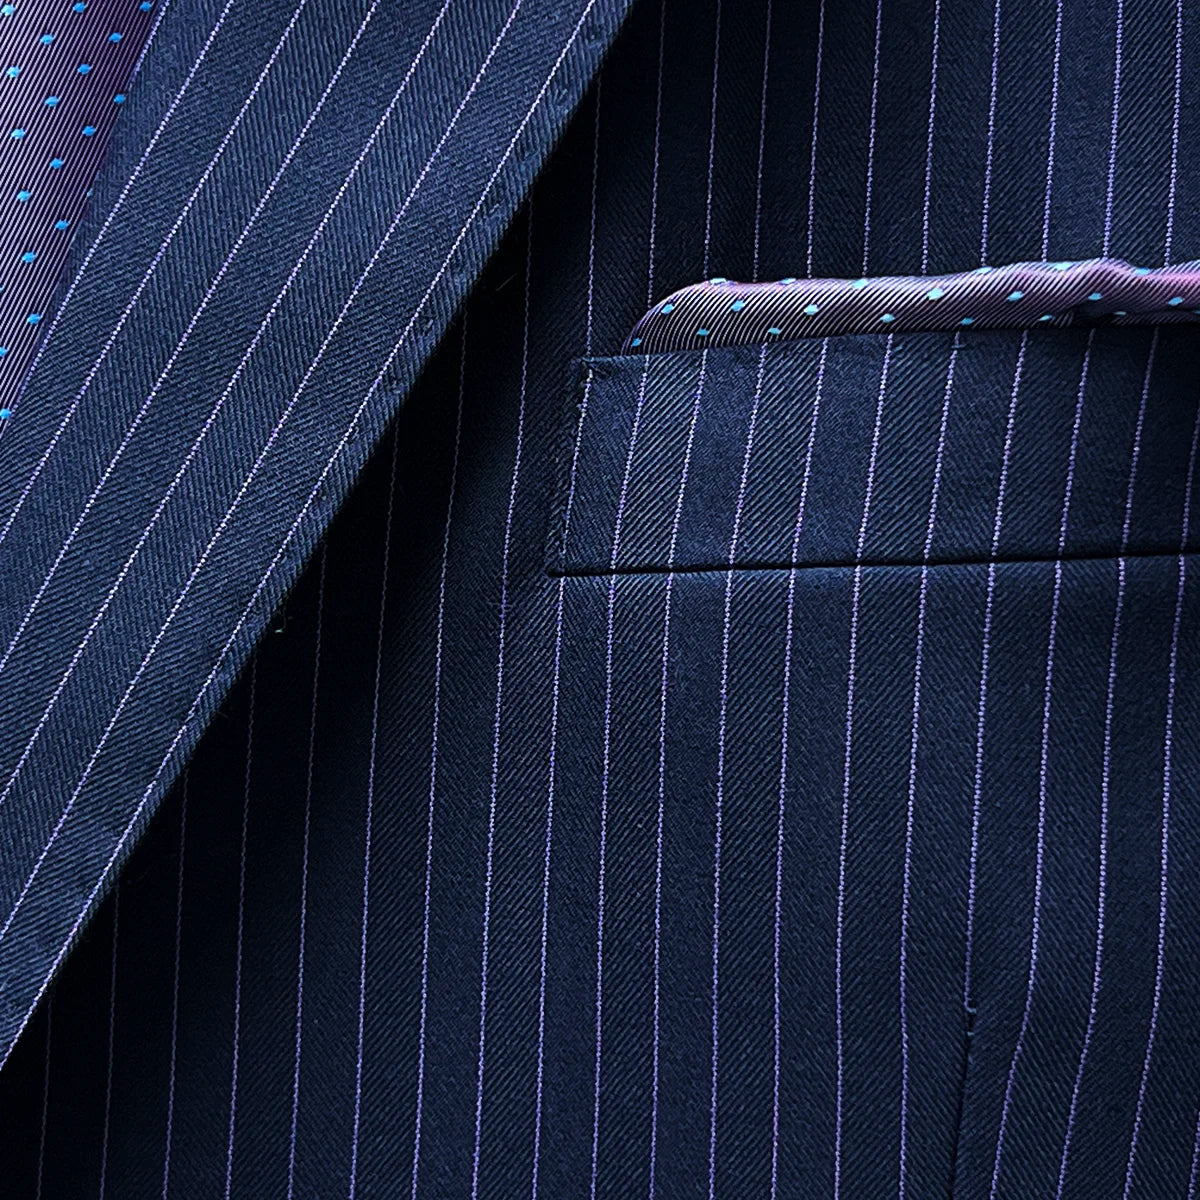 Pocket square adding a dash of elegance to a navy suit with purple pinstripes.